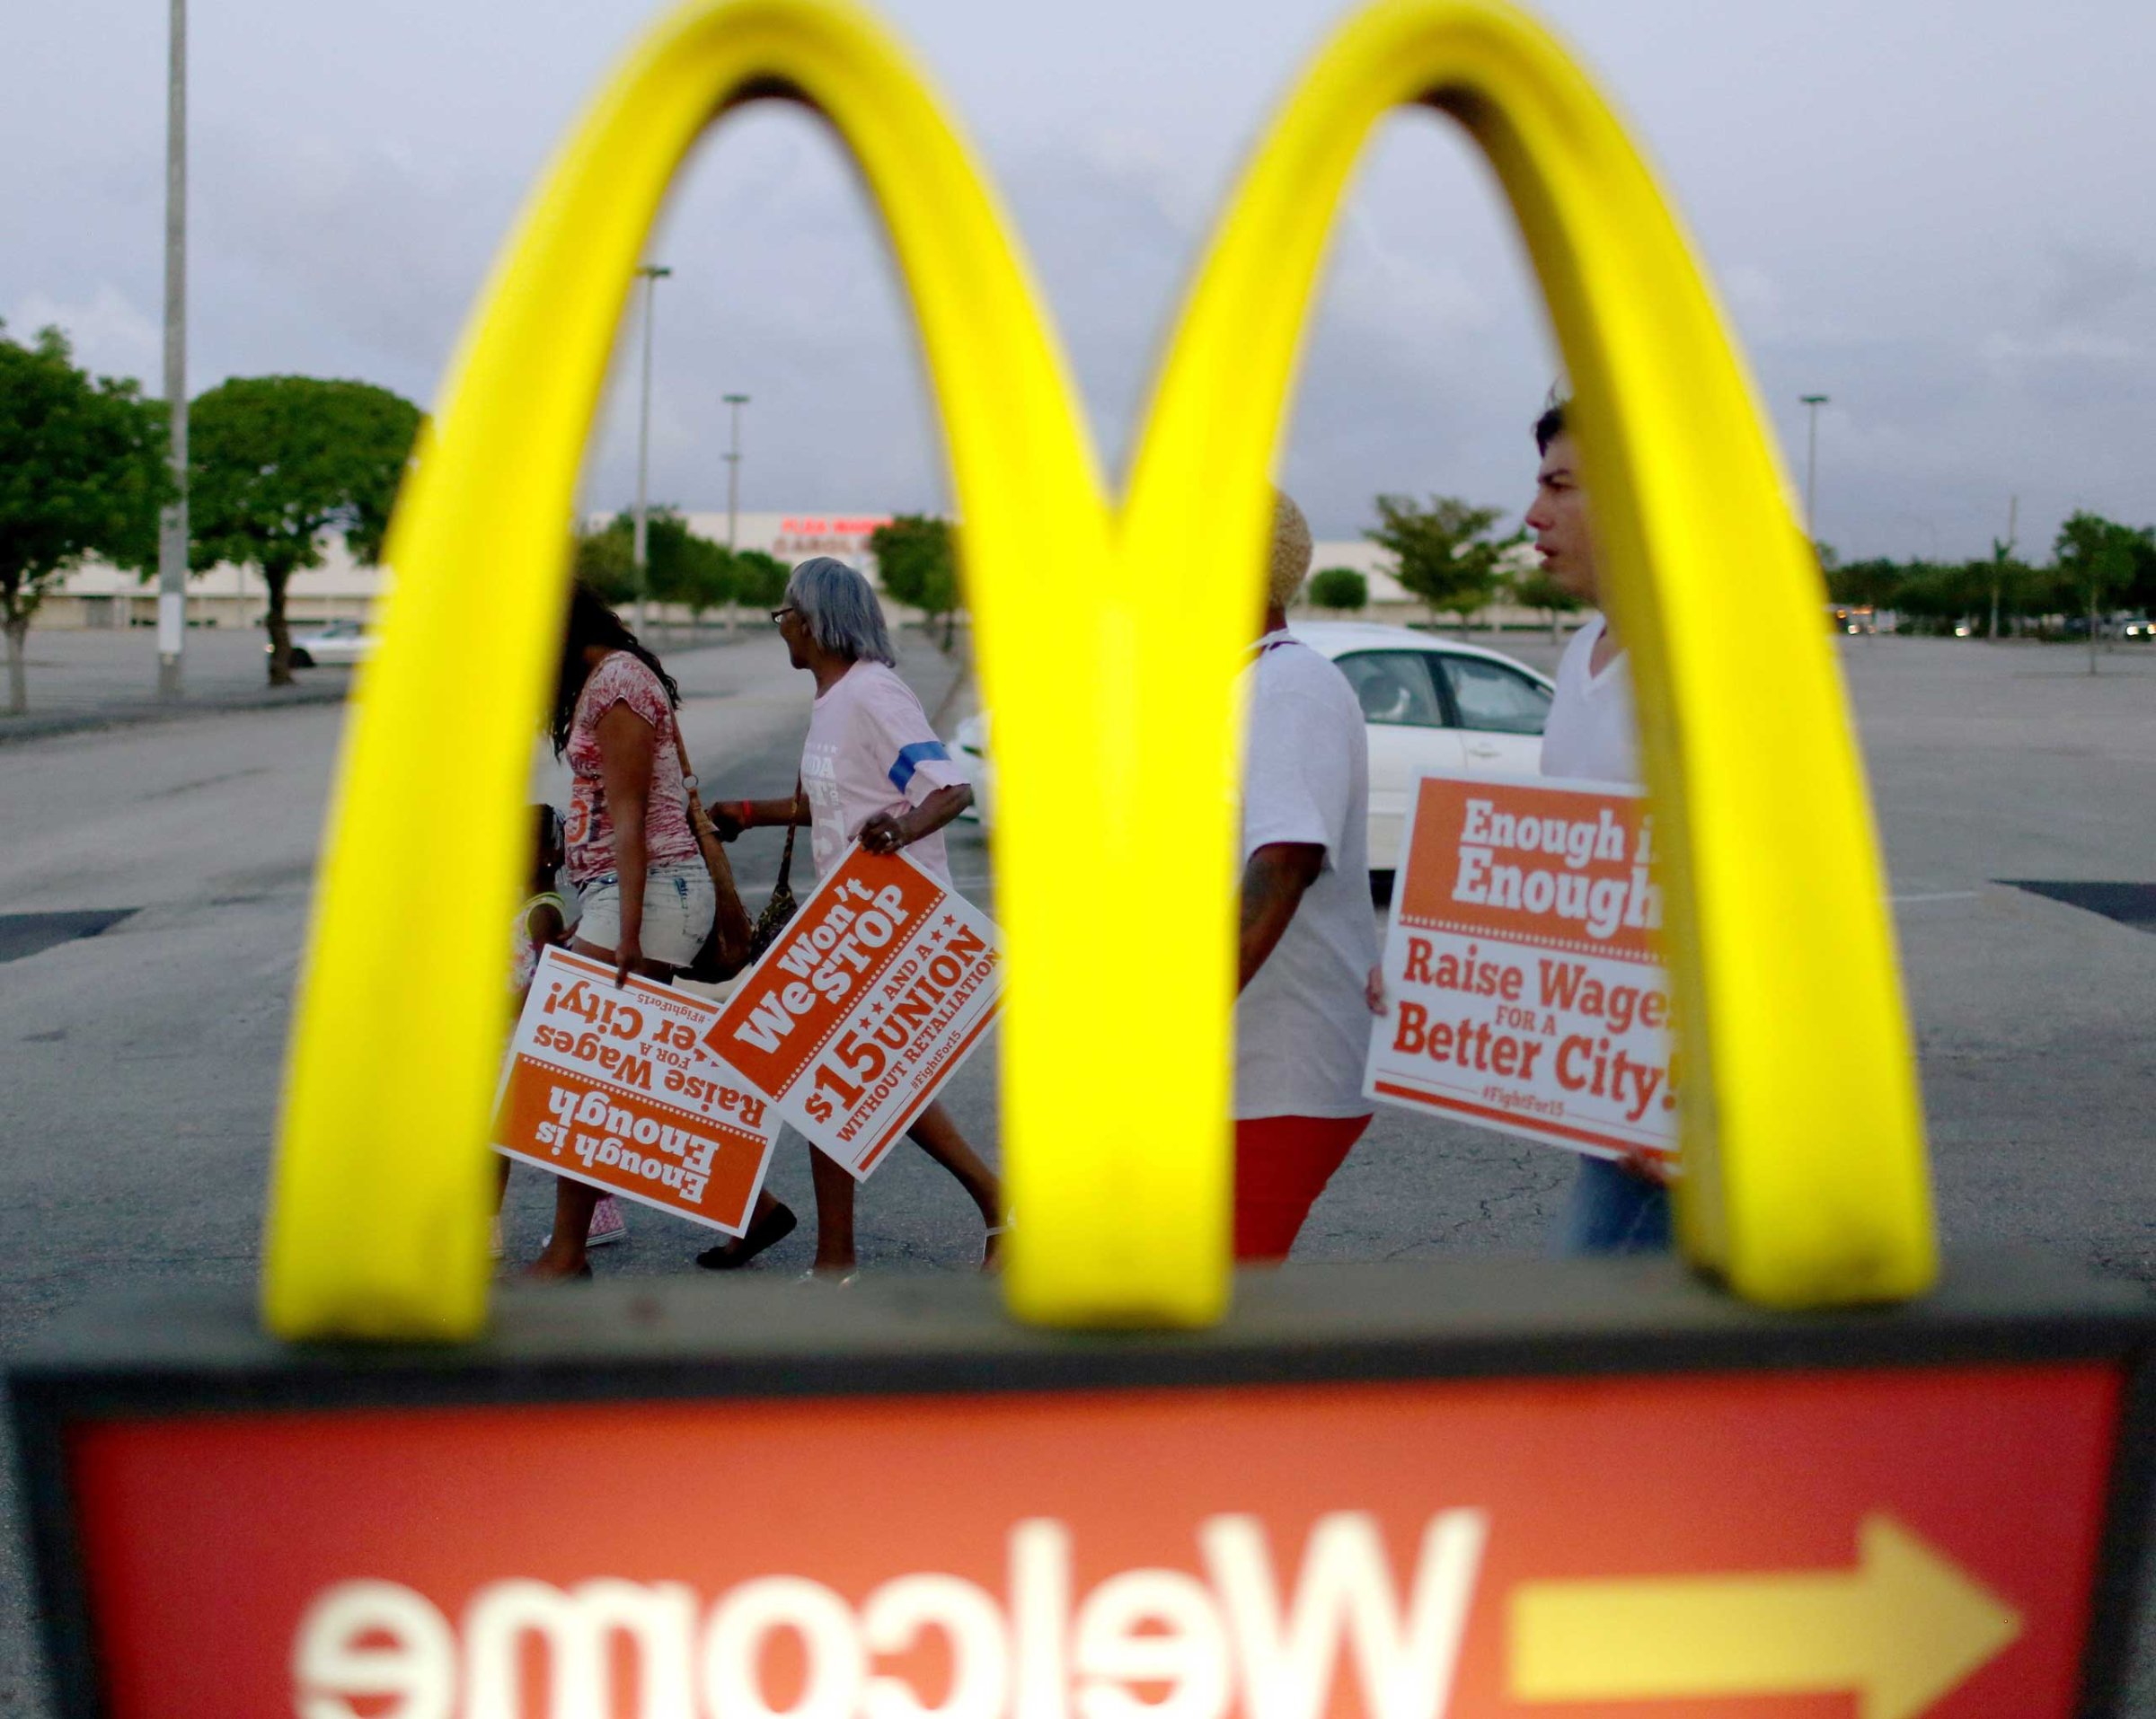 Protesters gather at a McDonald's restaurant on tax day asking for higher wages in Miami Gardens, Fla., on April 15, 2015.